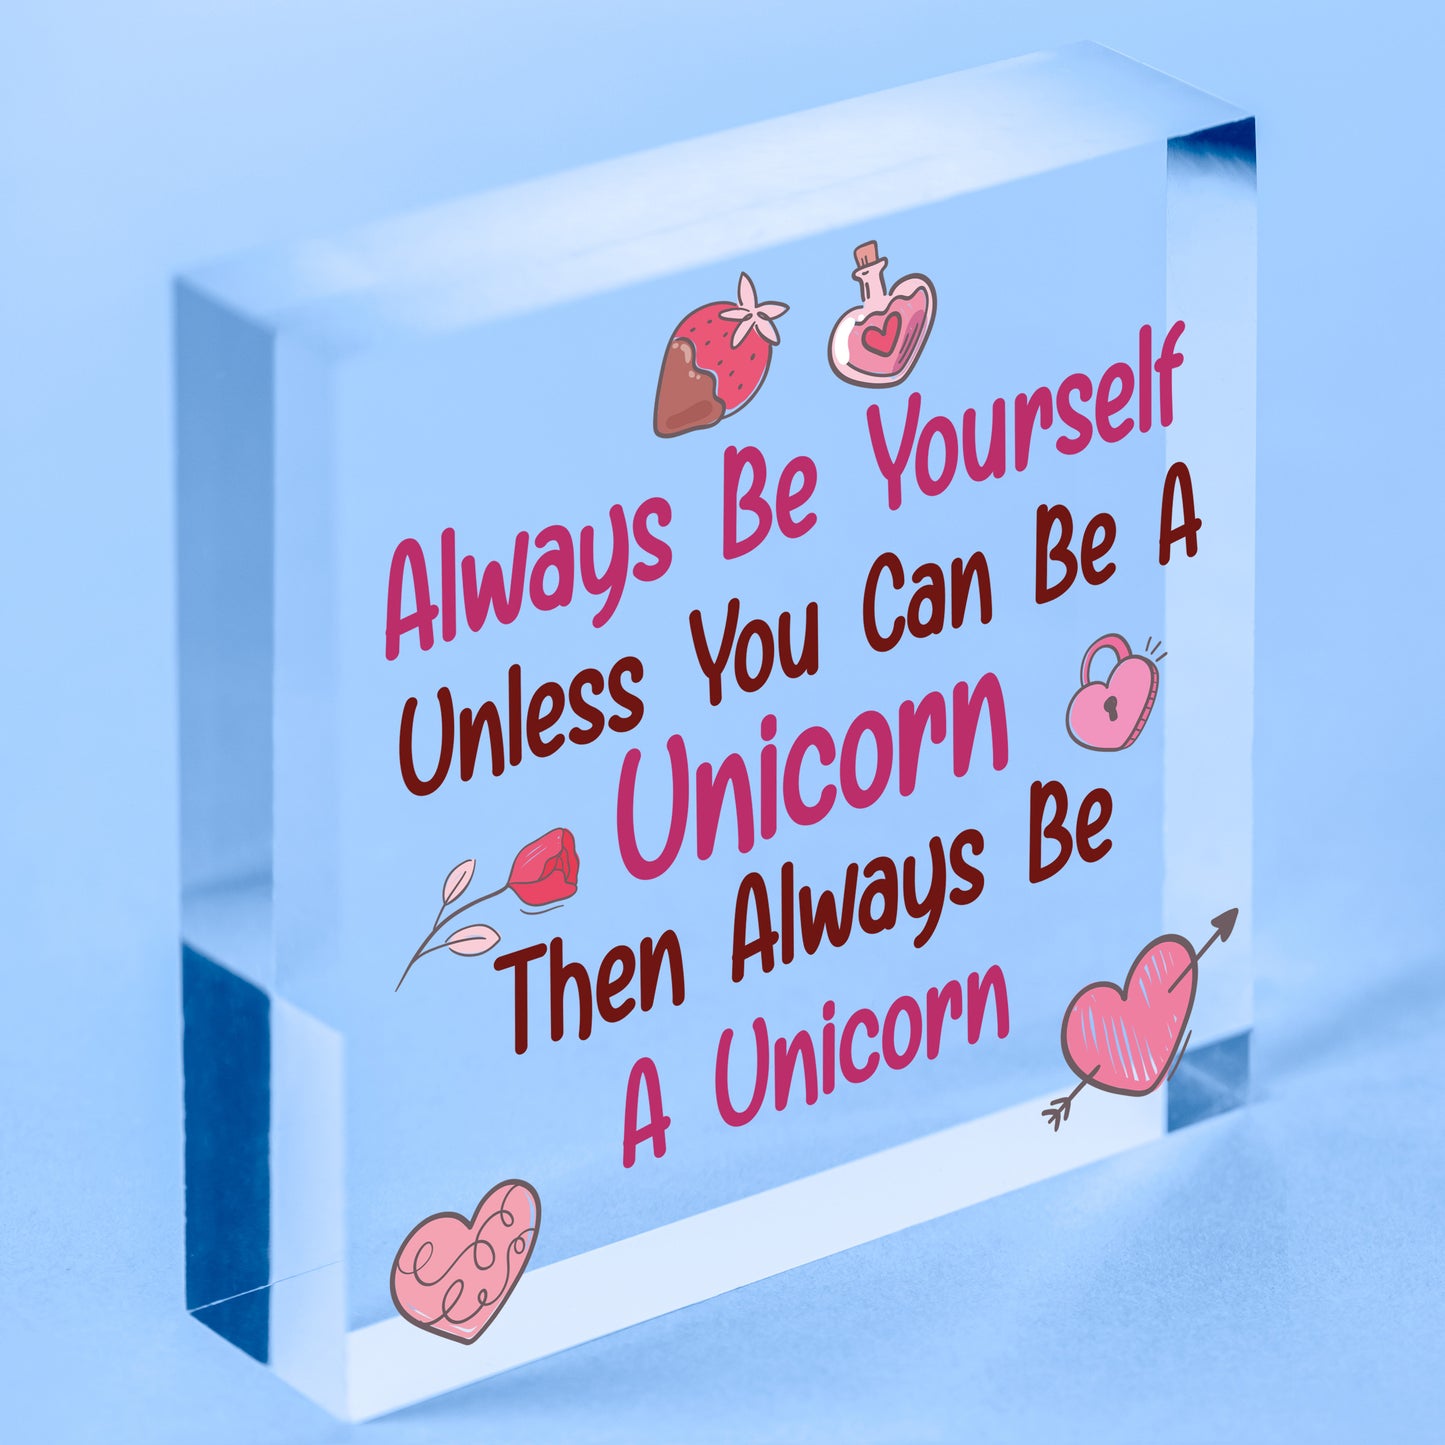 Always Be A Unicorn Funny Hanging Heart Wood Plaque Friendship Gift Sign New Free-Standing Block